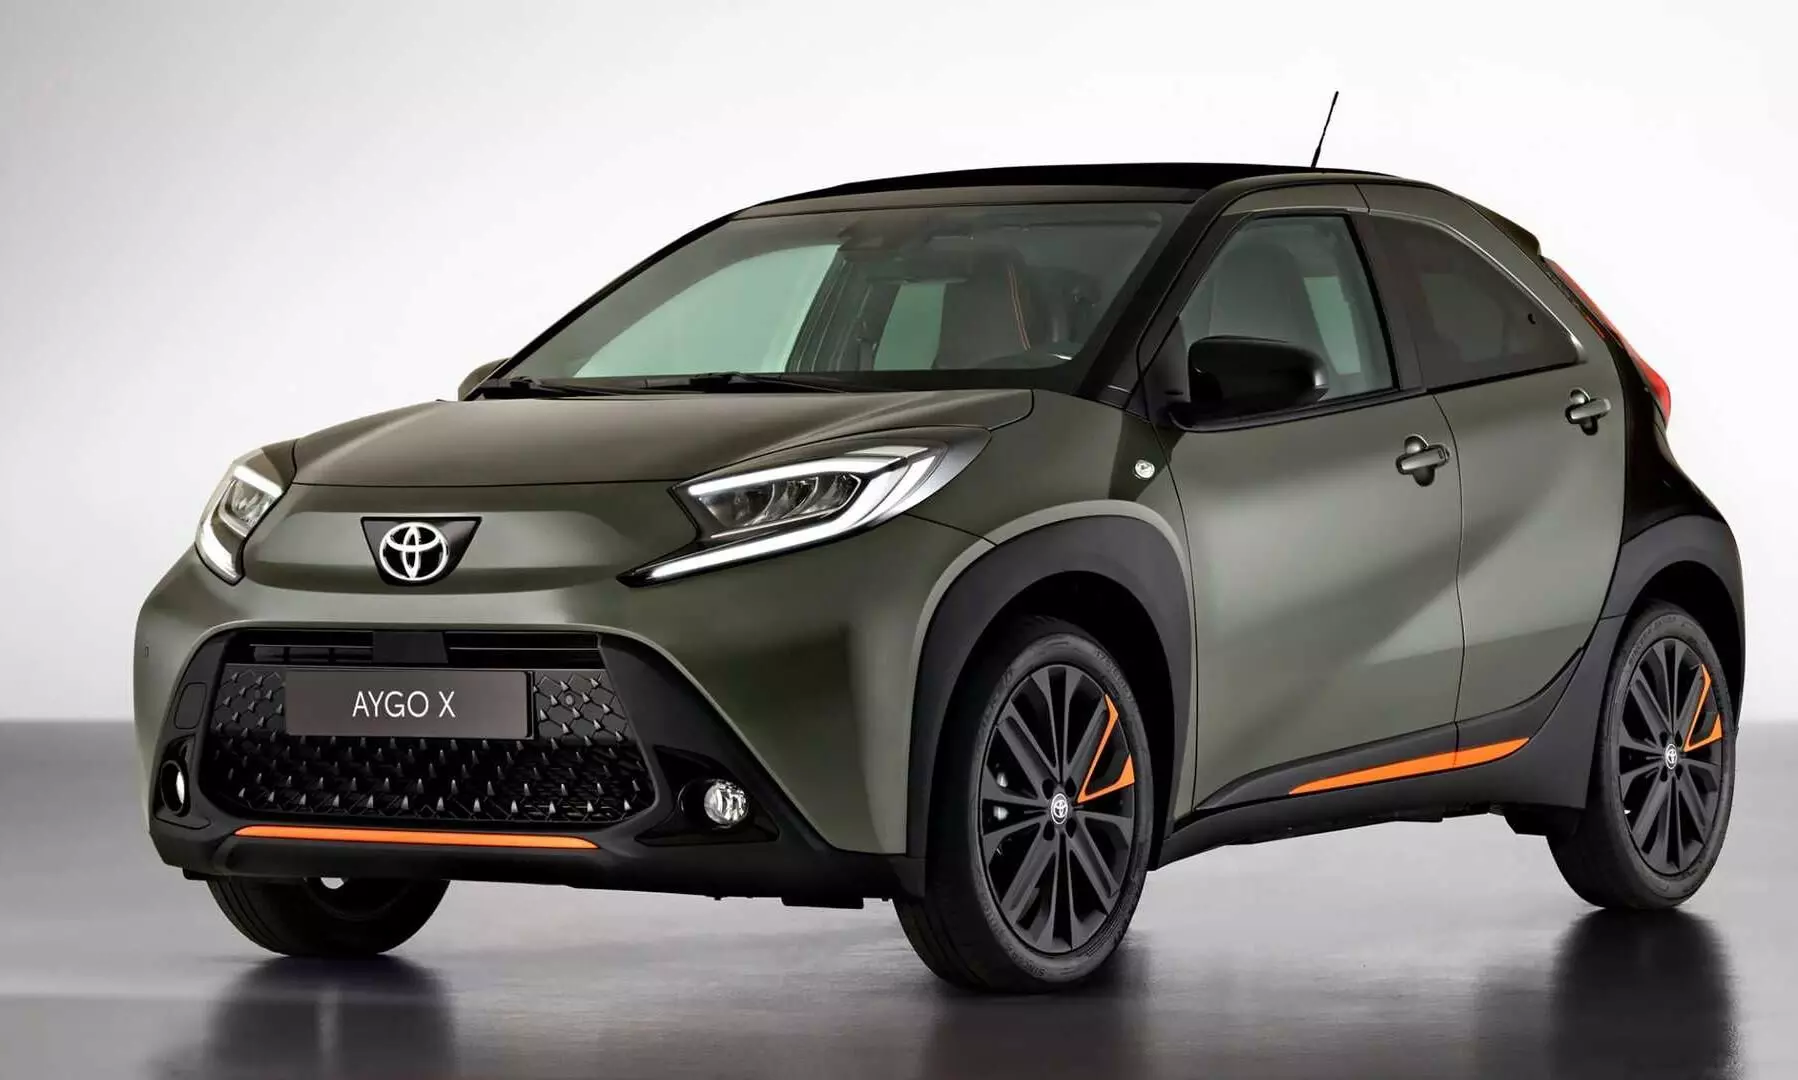 This Toyota sub-compact car may be a worthy rival to Tata Punch